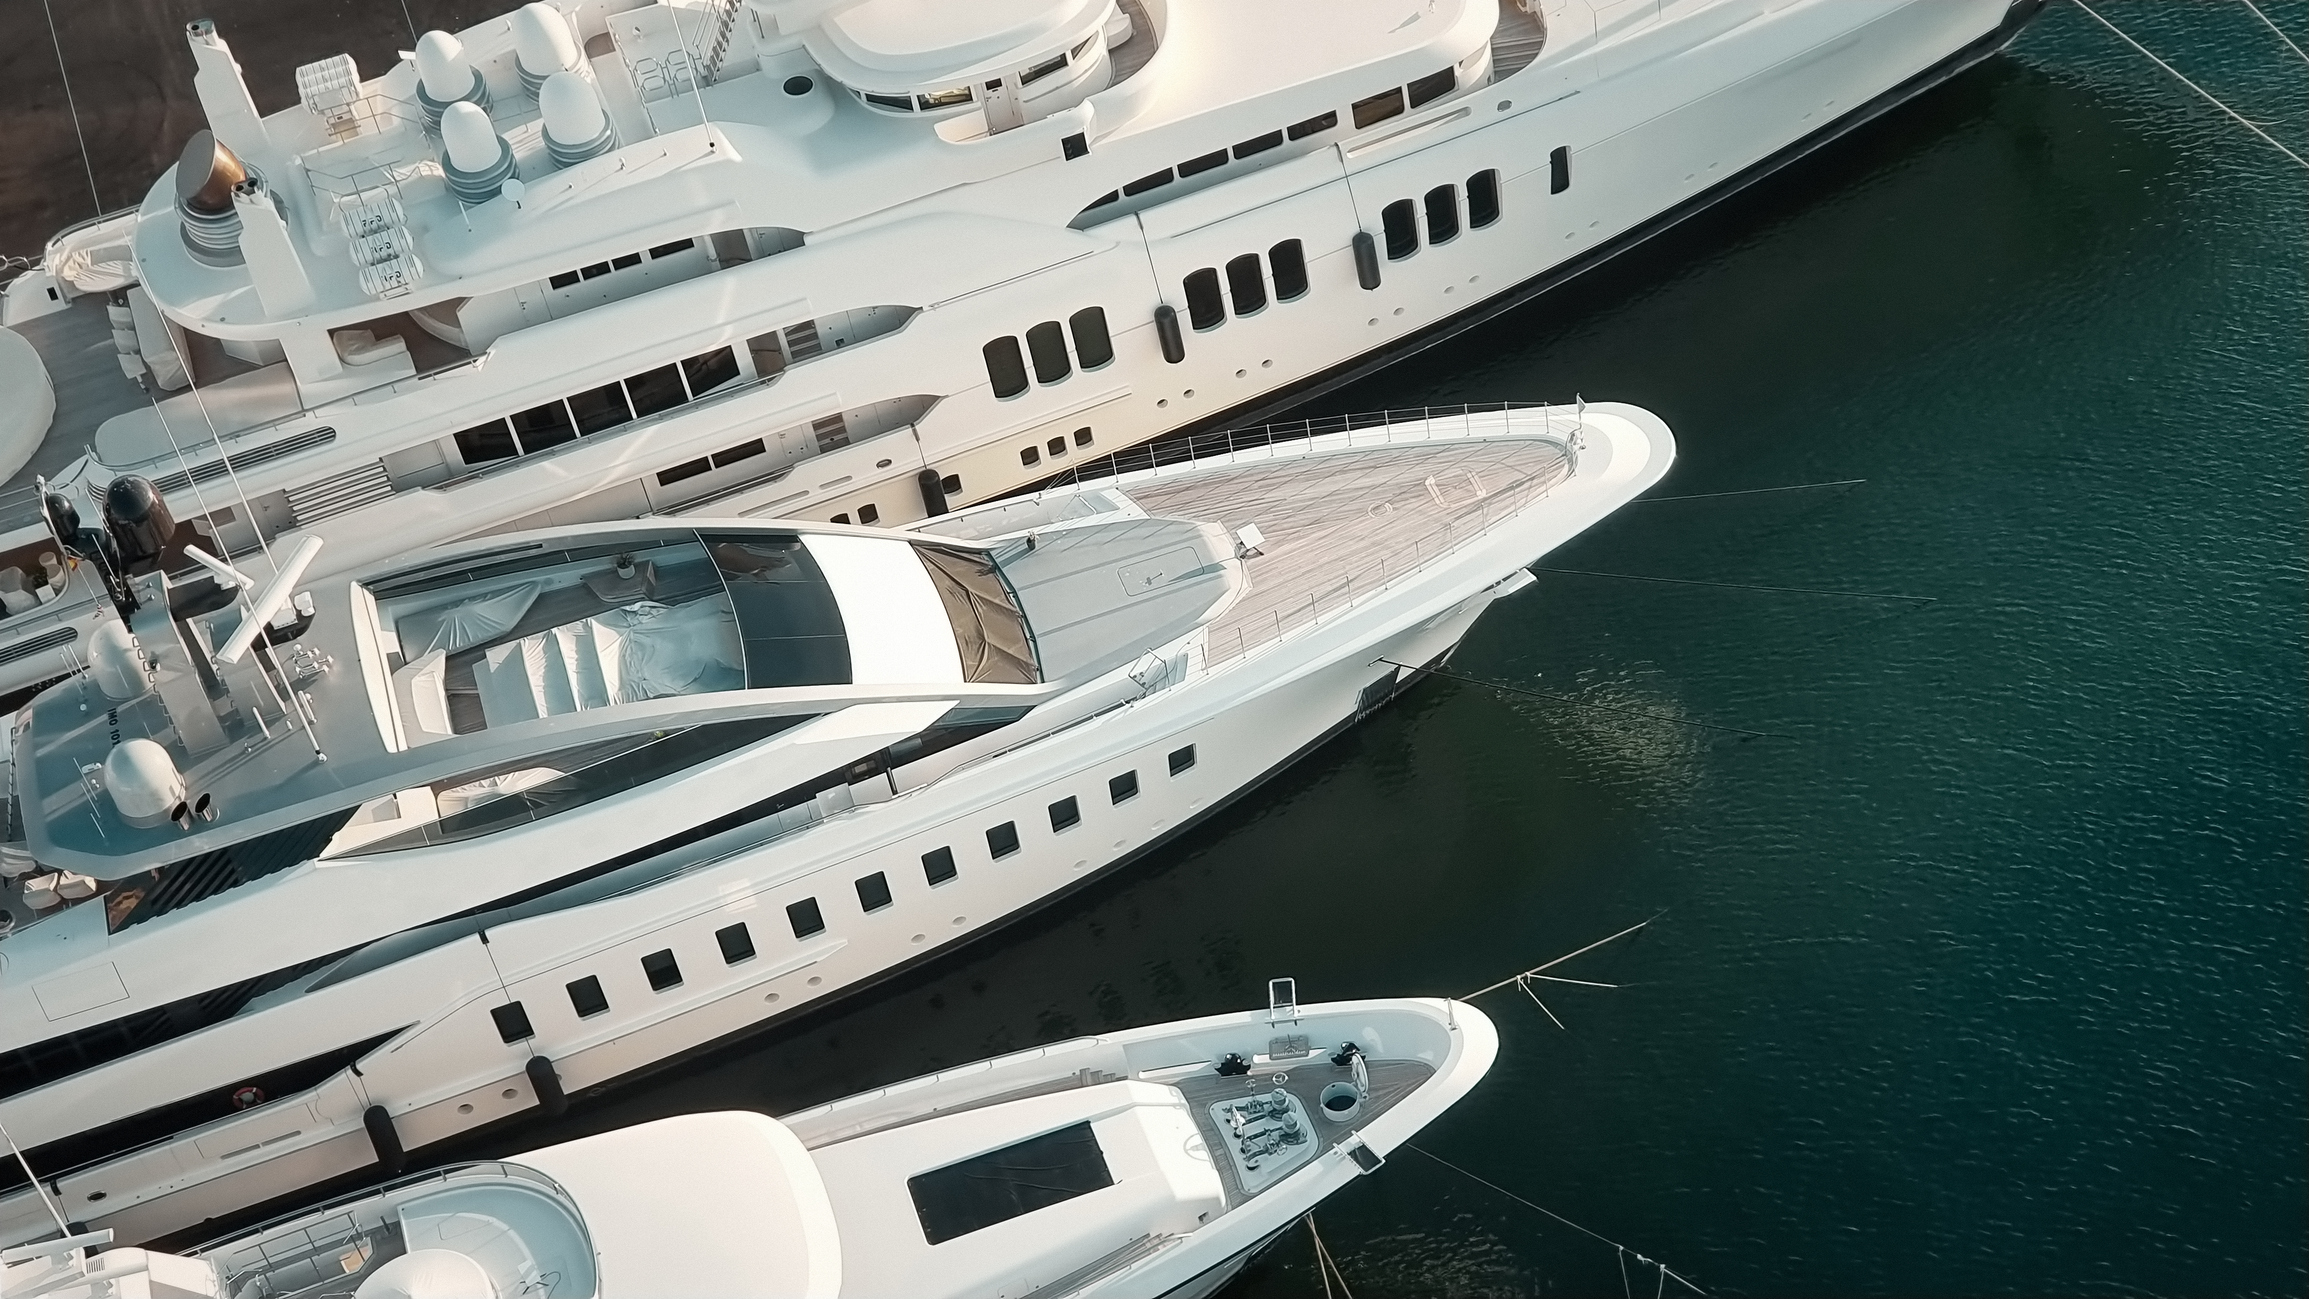 Luxury yachts moored at a marina, reflecting on wealth and status for an article on work and money